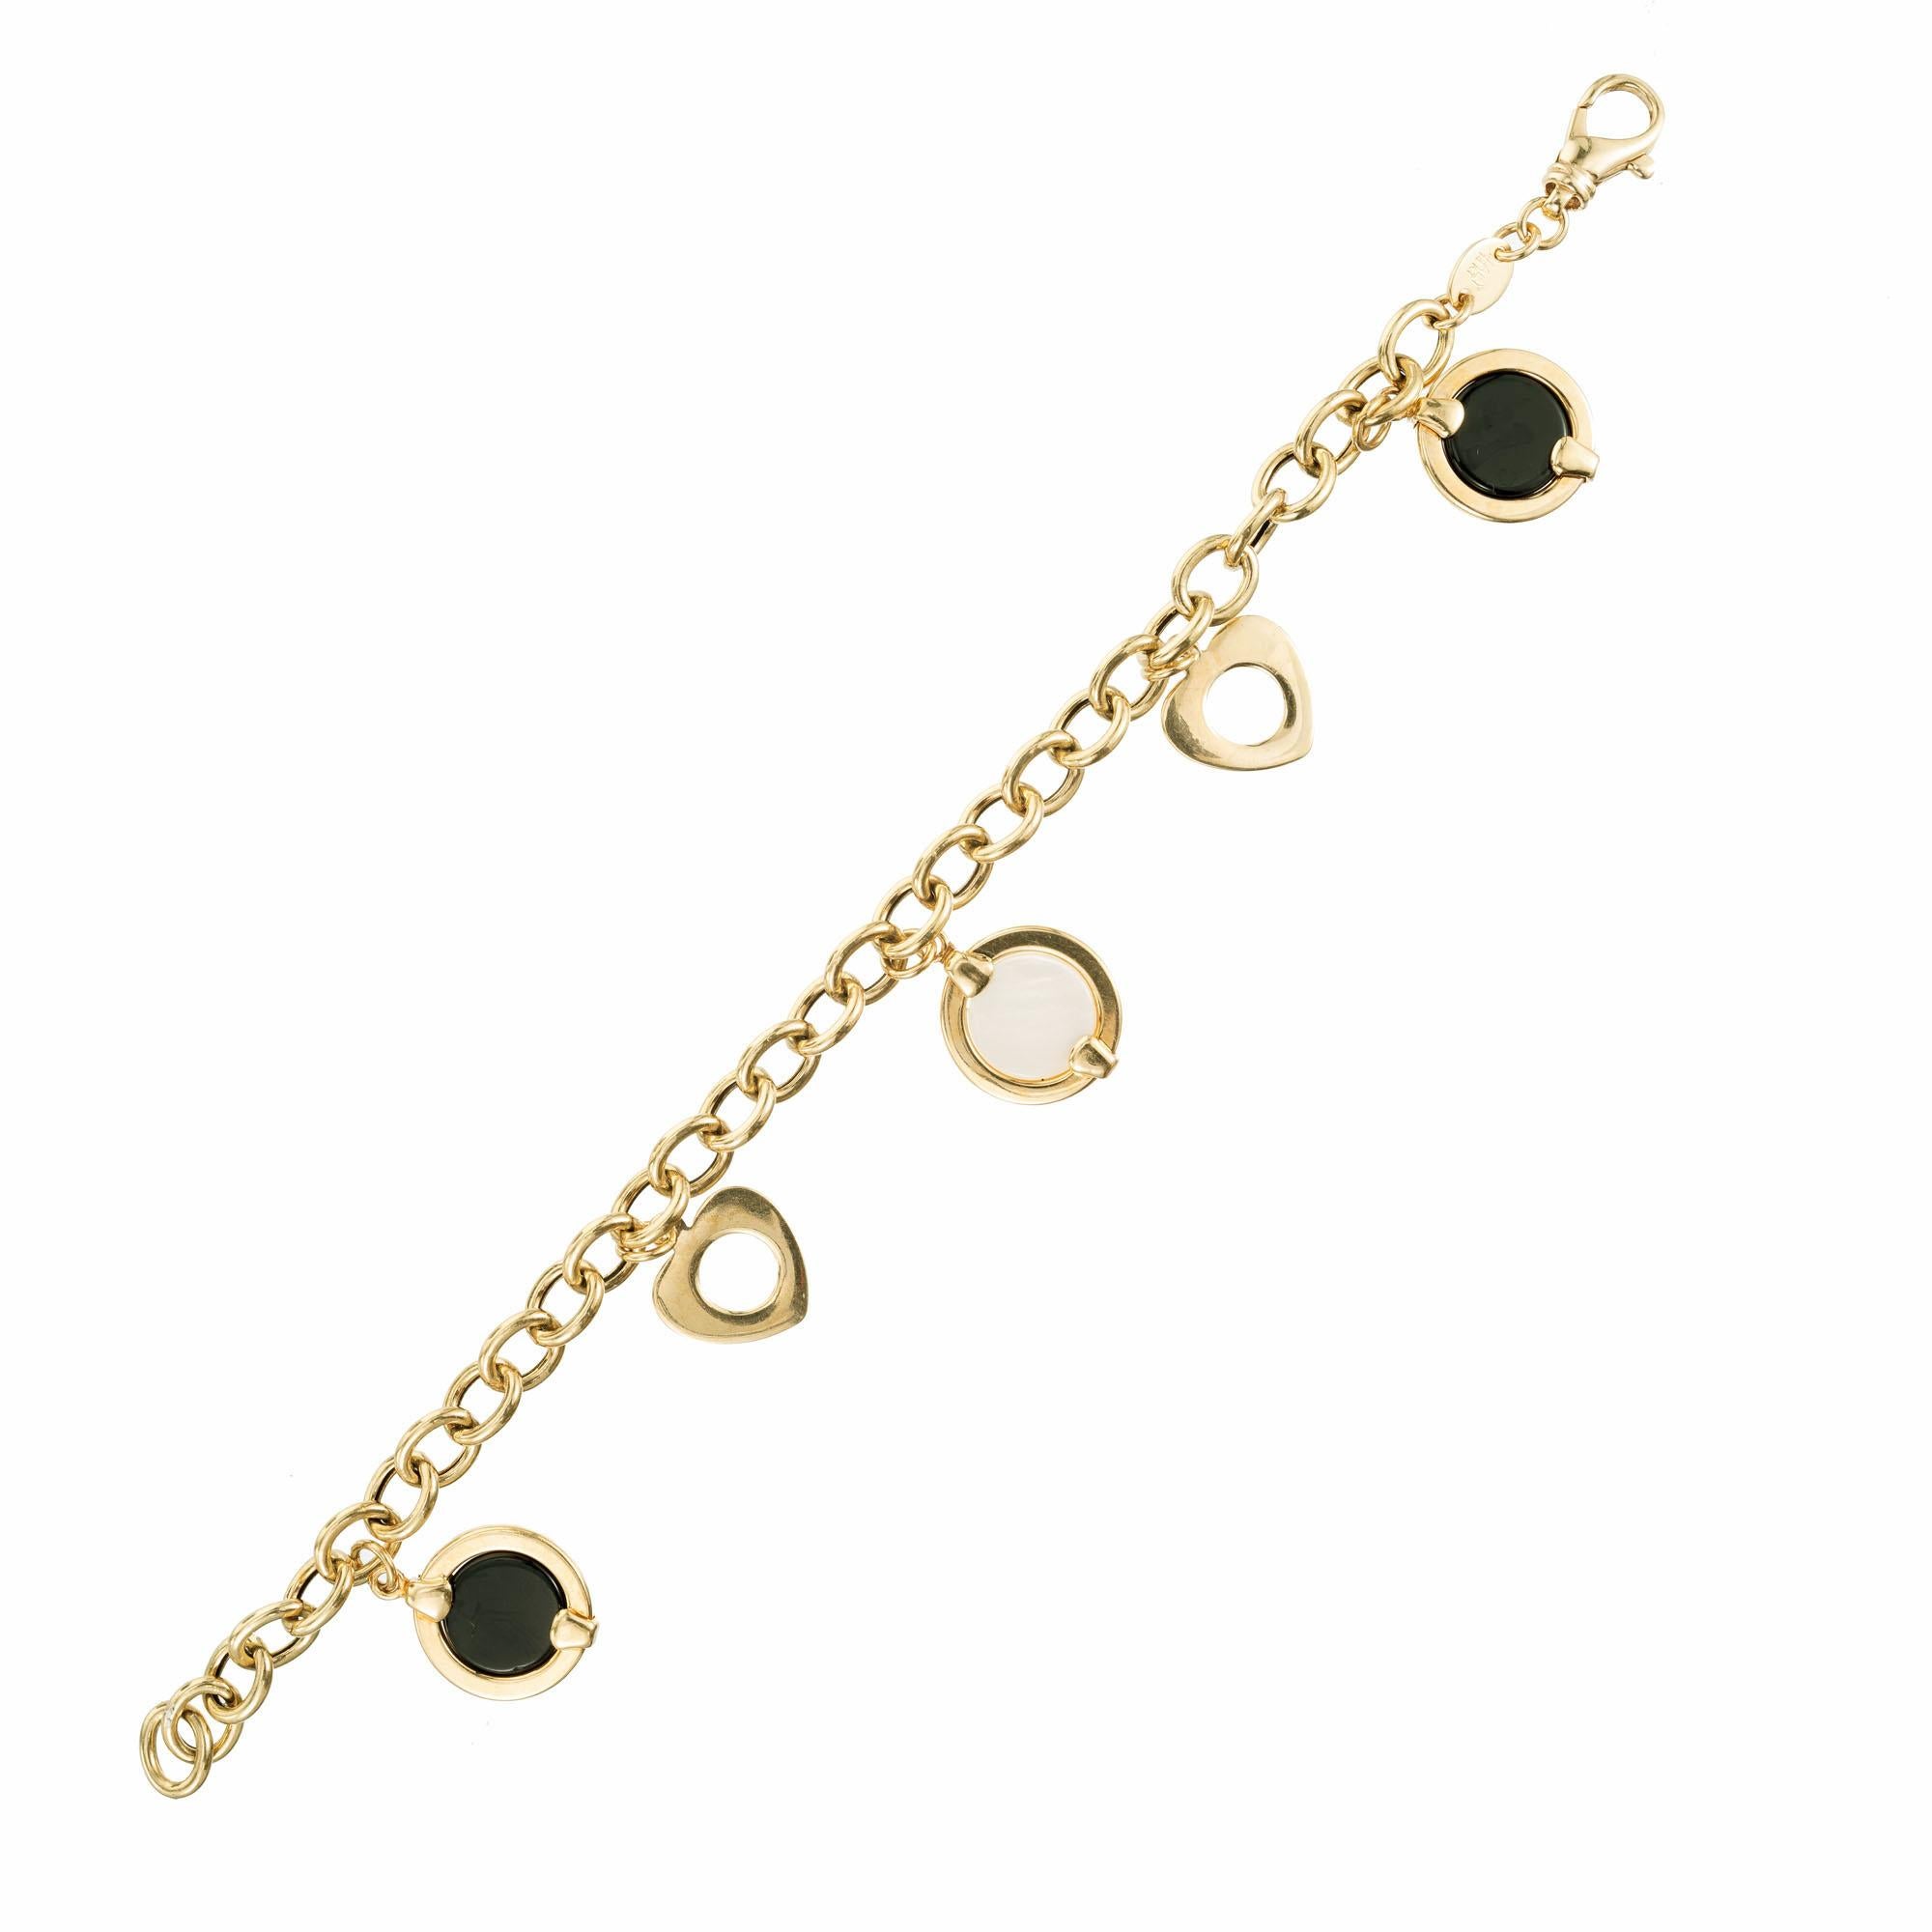 14k yellow gold oval shaped open link charm bracelet containing alternating charms of black onyx discs wrapped in yellow gold, open hearts and a mother of pearl disc wrapped in yellow gold in the center. 7 inches.

2 round black onyx discs, 10mm